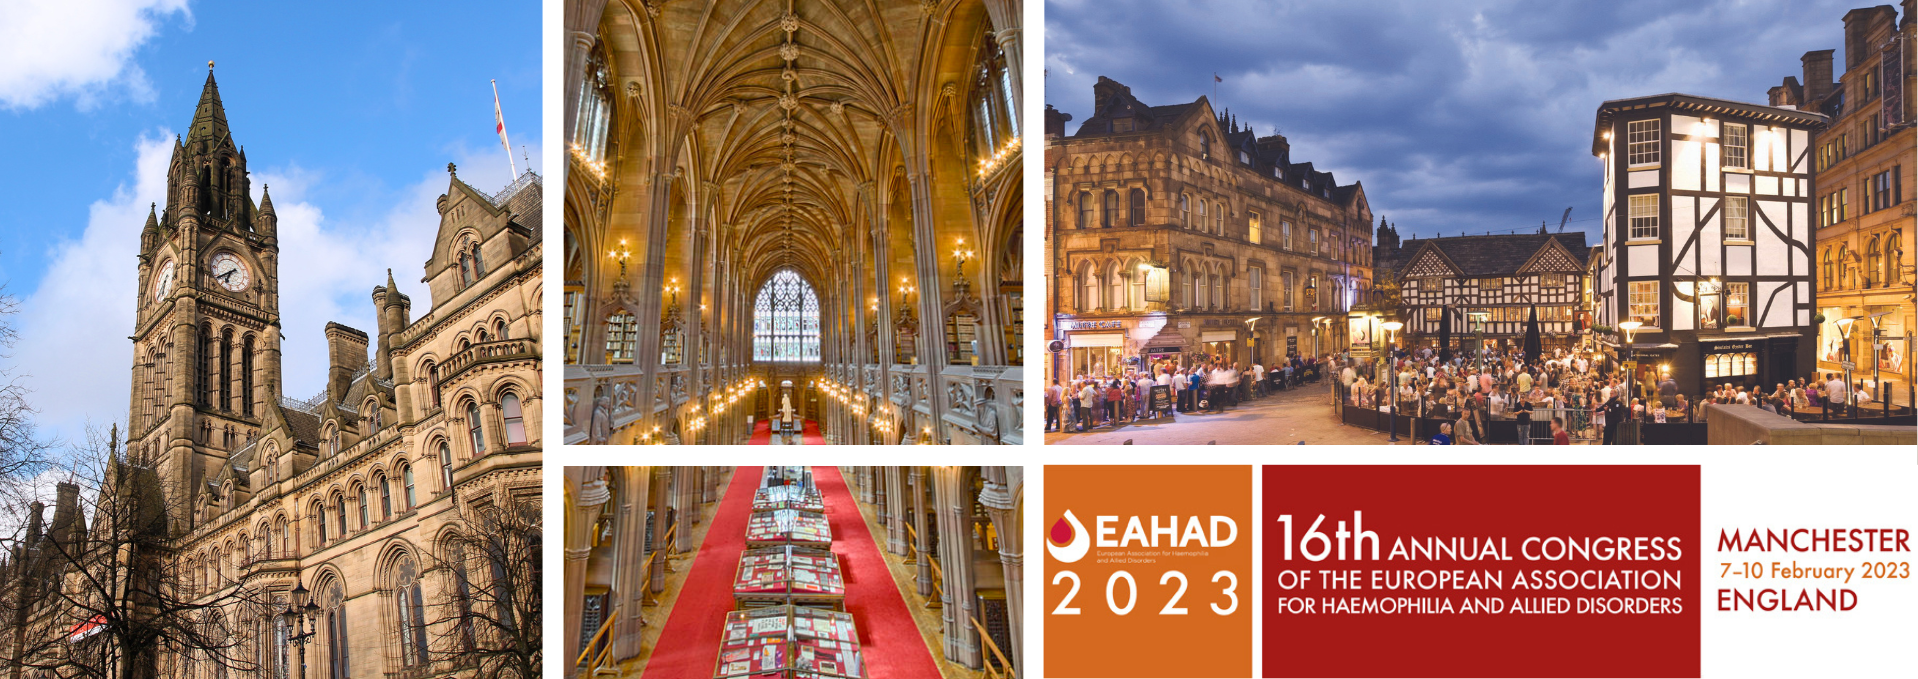 16th Annual Congress of the European Association for Haemophilia and Allied Disorders - EAHAD 2023